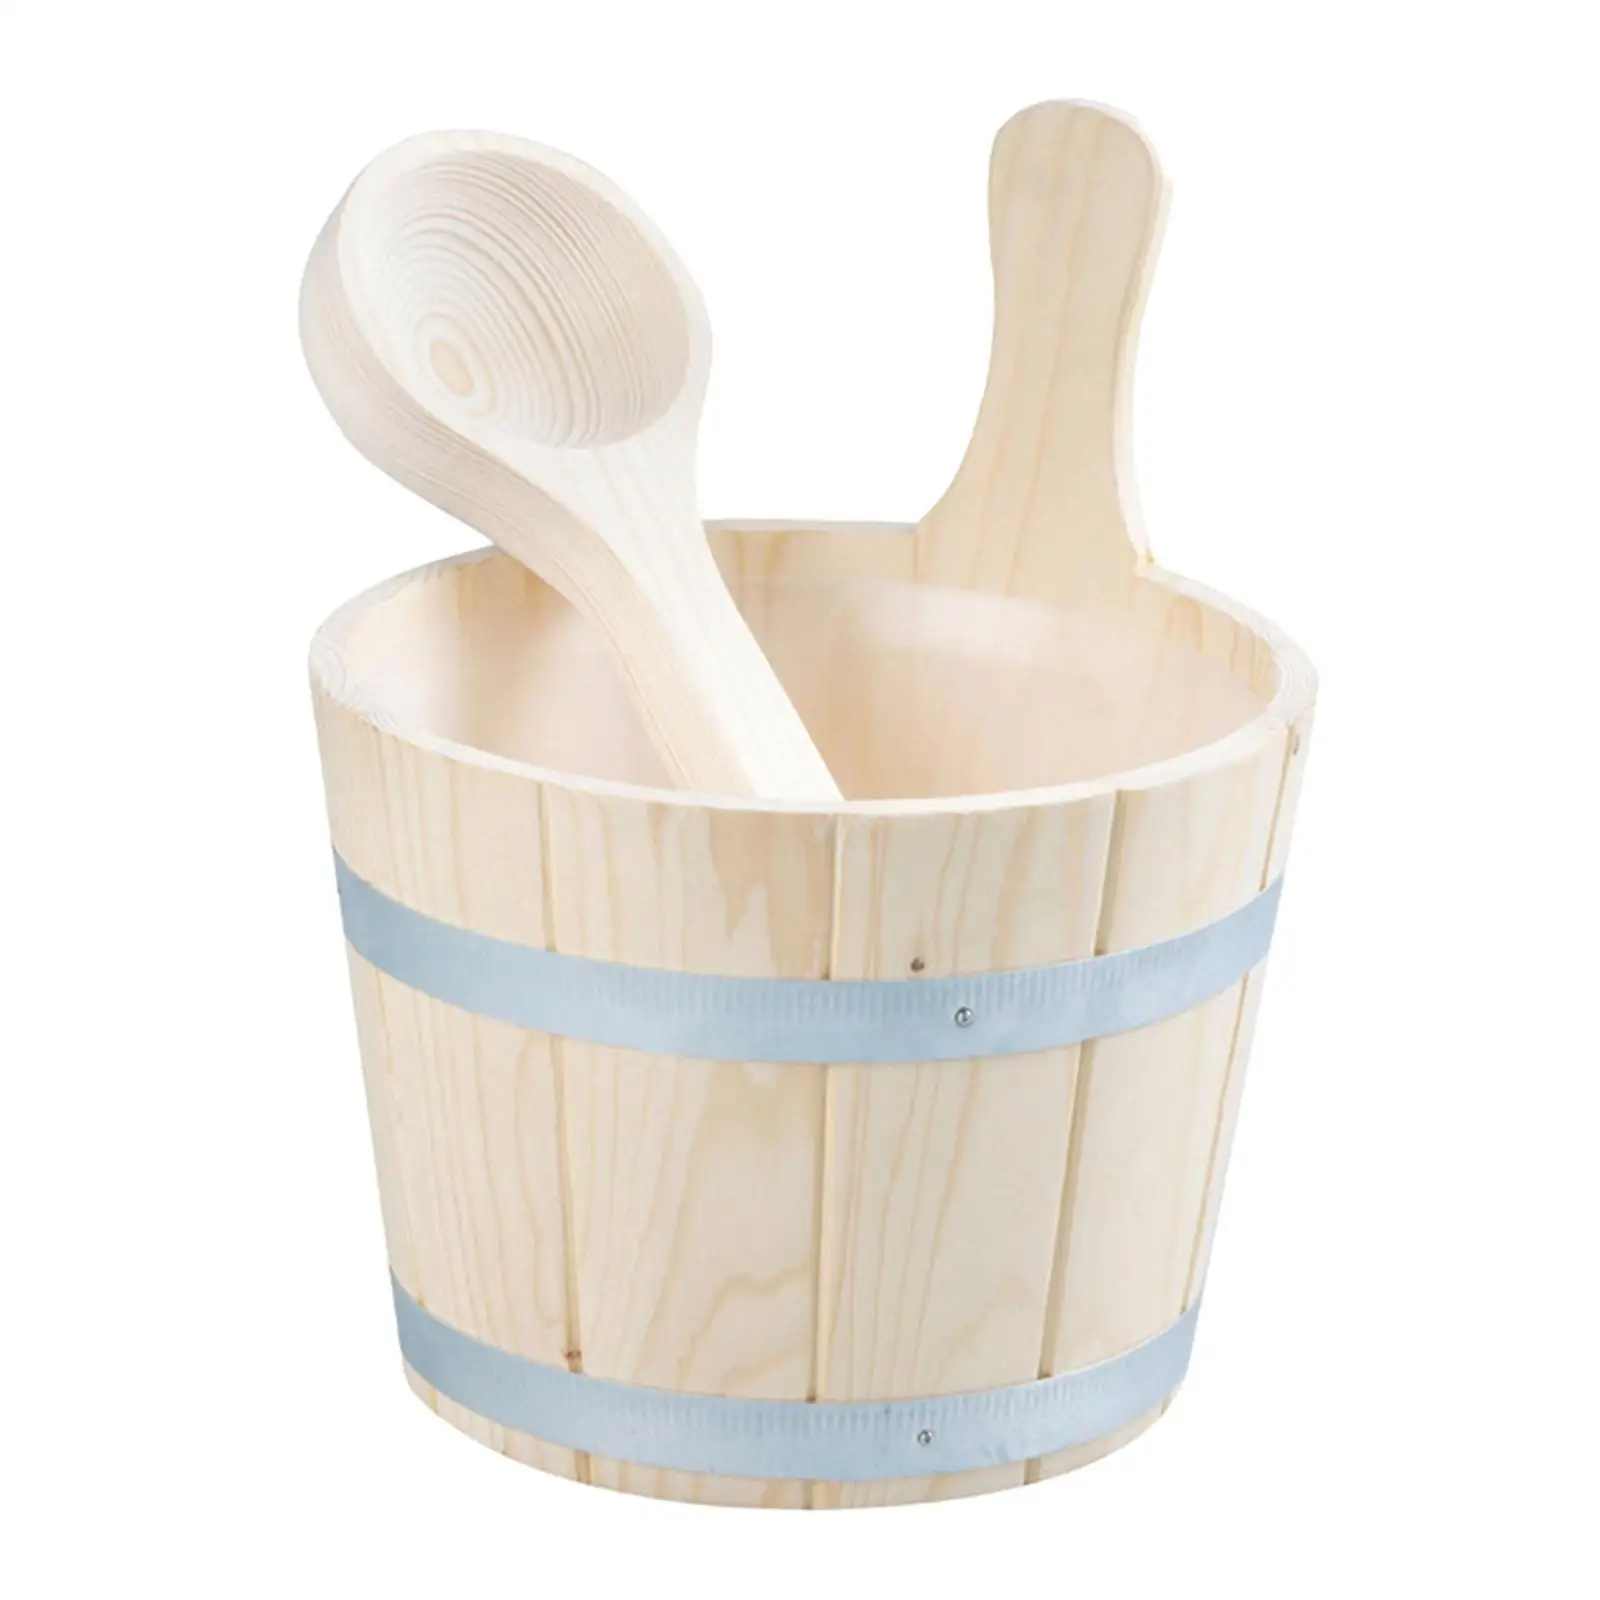 Wooden Sauna Bucket and Ladle Set Portable with Sauna Liner 5L for SPA Room